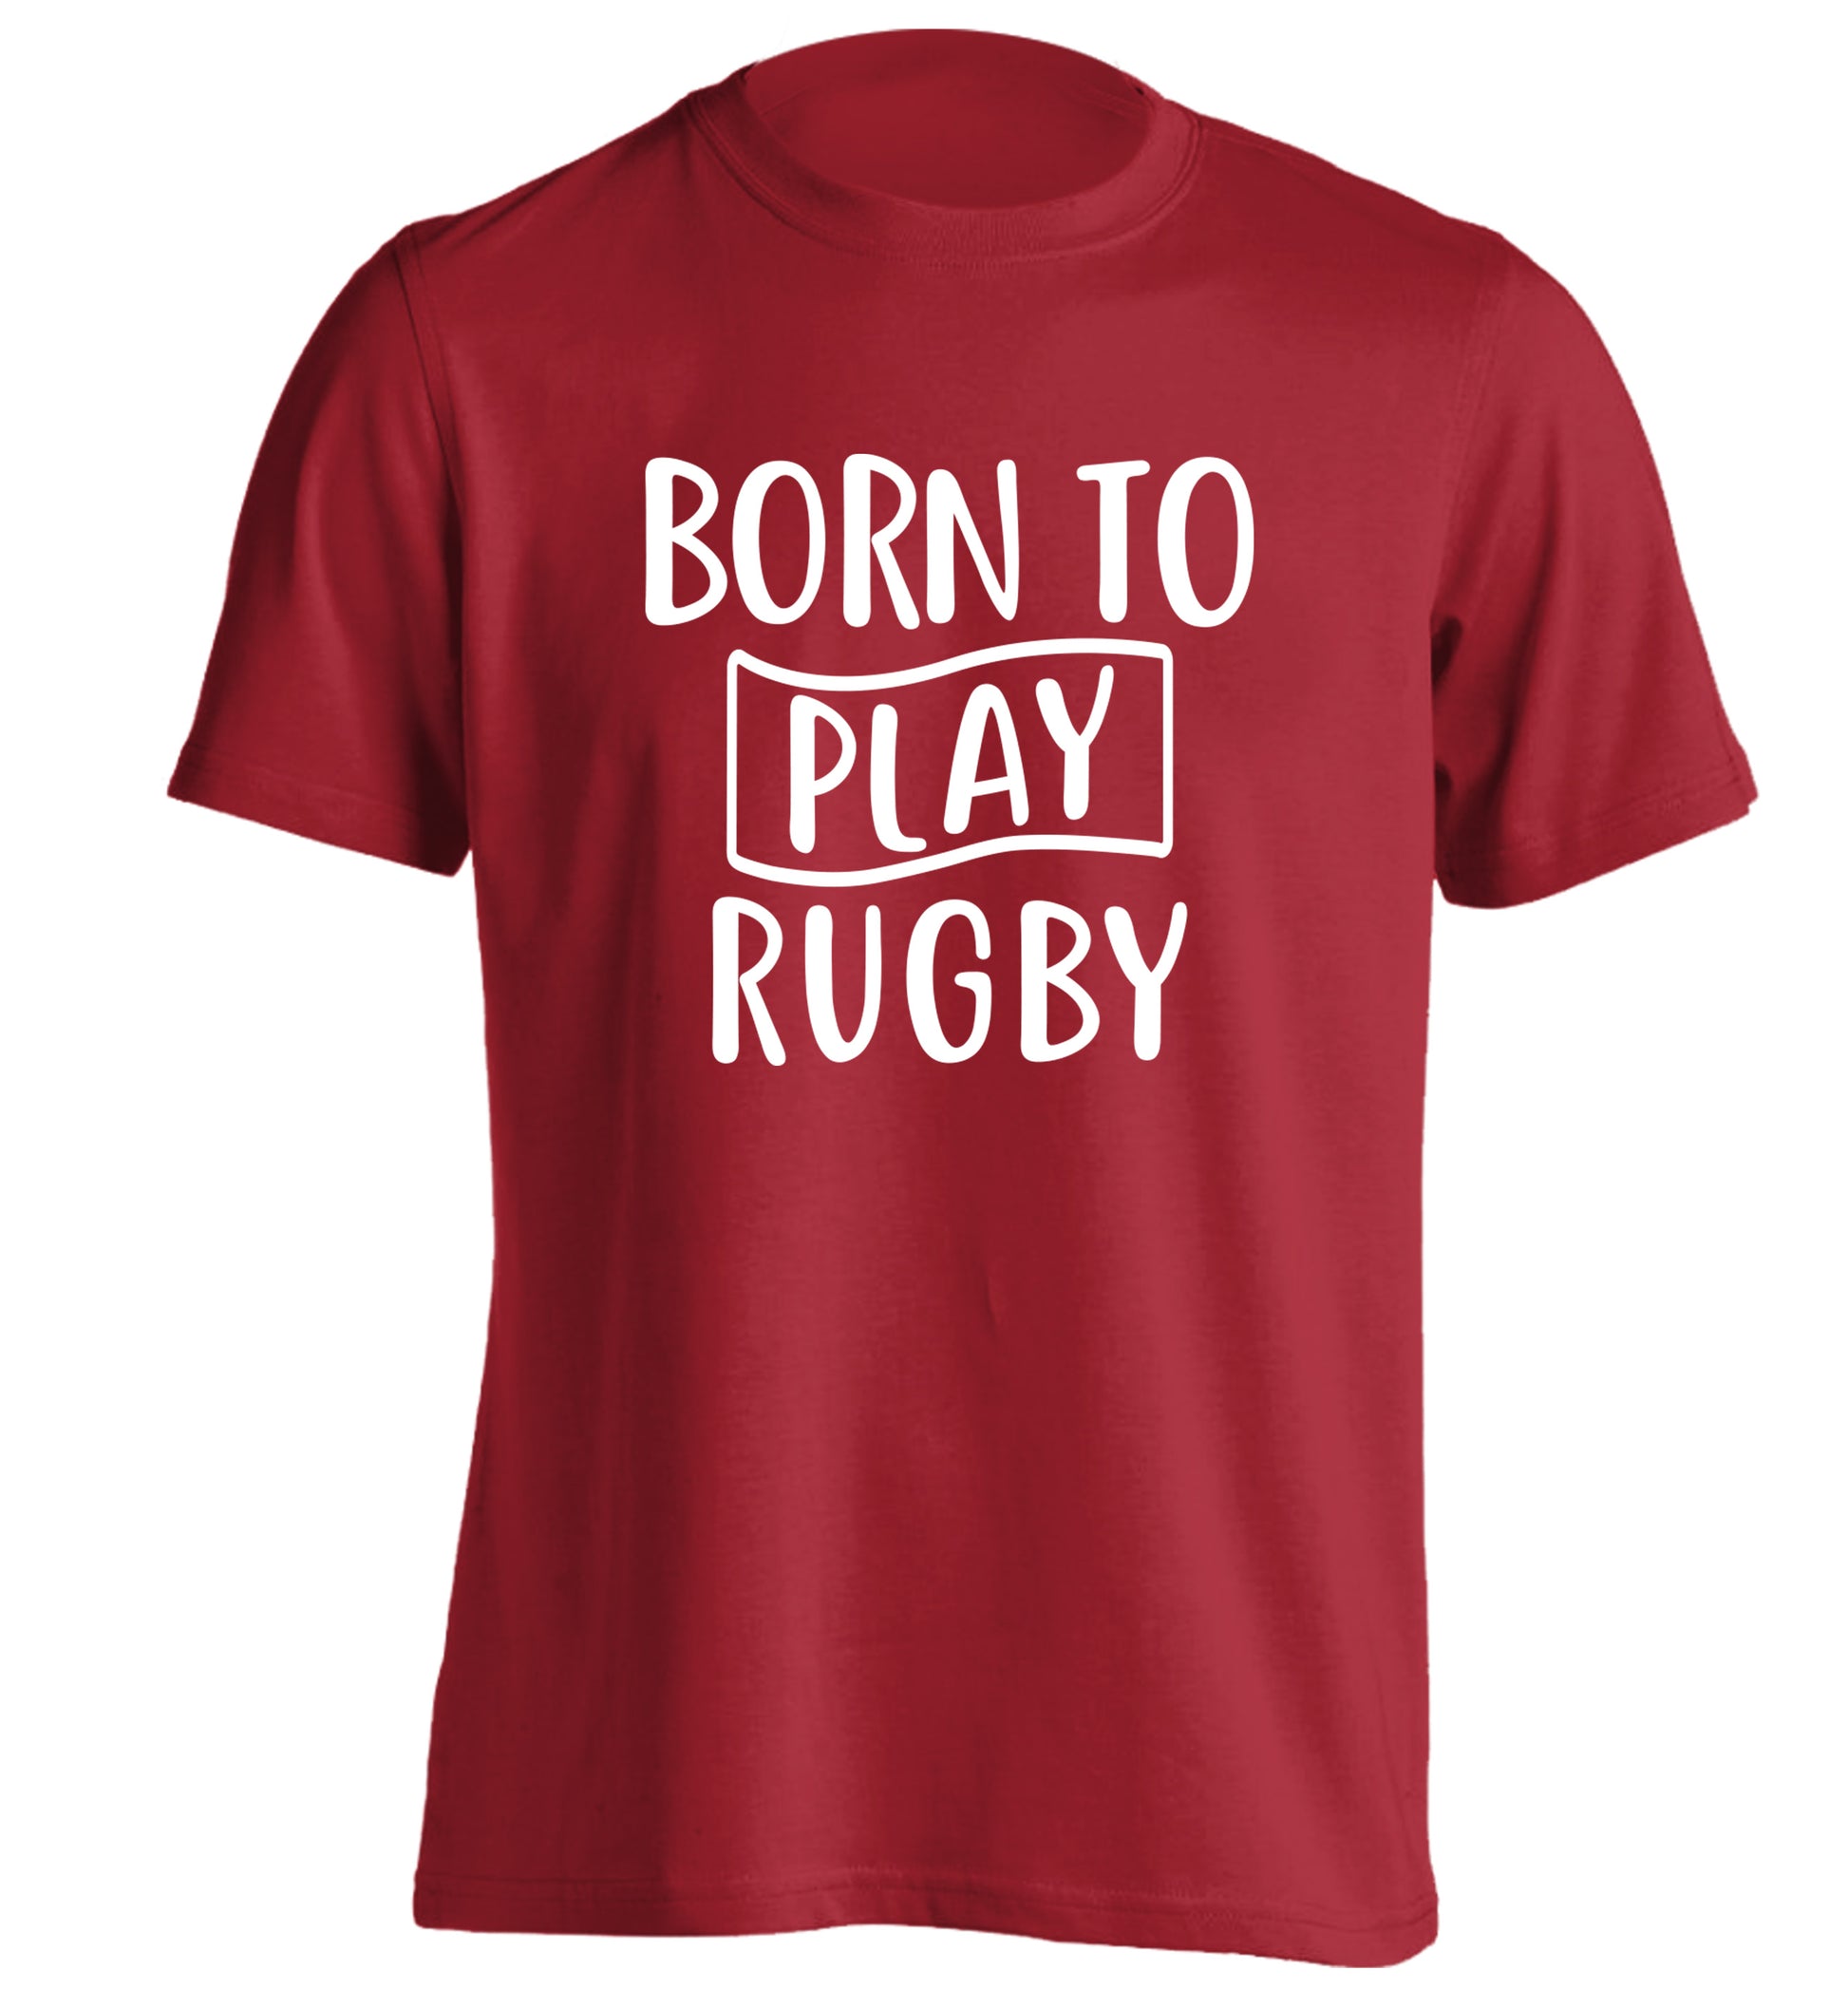 Born to play rugby adults unisex red Tshirt 2XL